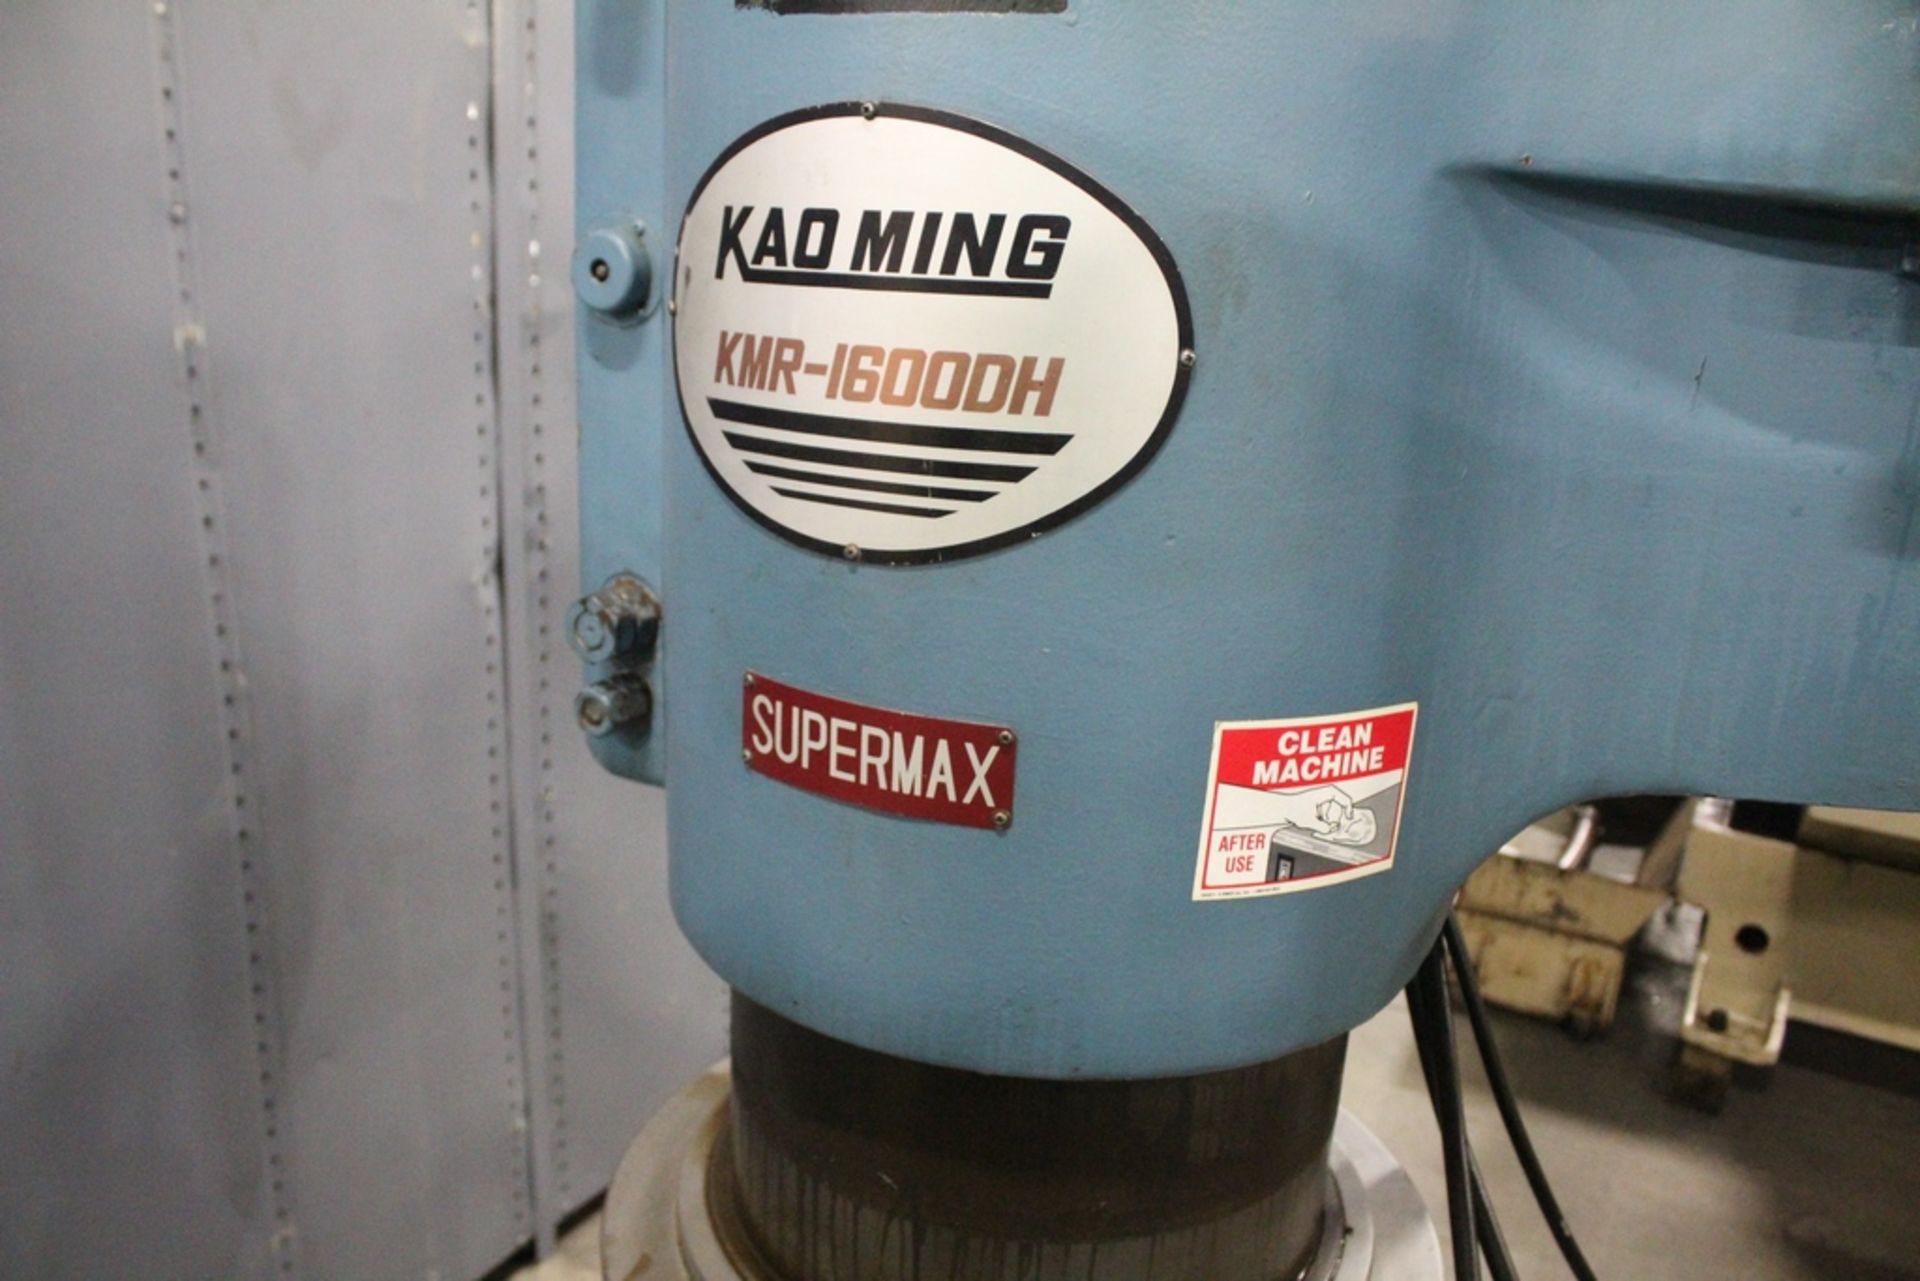 KAO MING MODEL KMR-1600DH SUPERMAX RADIAL ARM DRILL, 5' X 16" COLUMN, S/N 1888 (SHIPPING WEIGHT 10, - Image 6 of 6